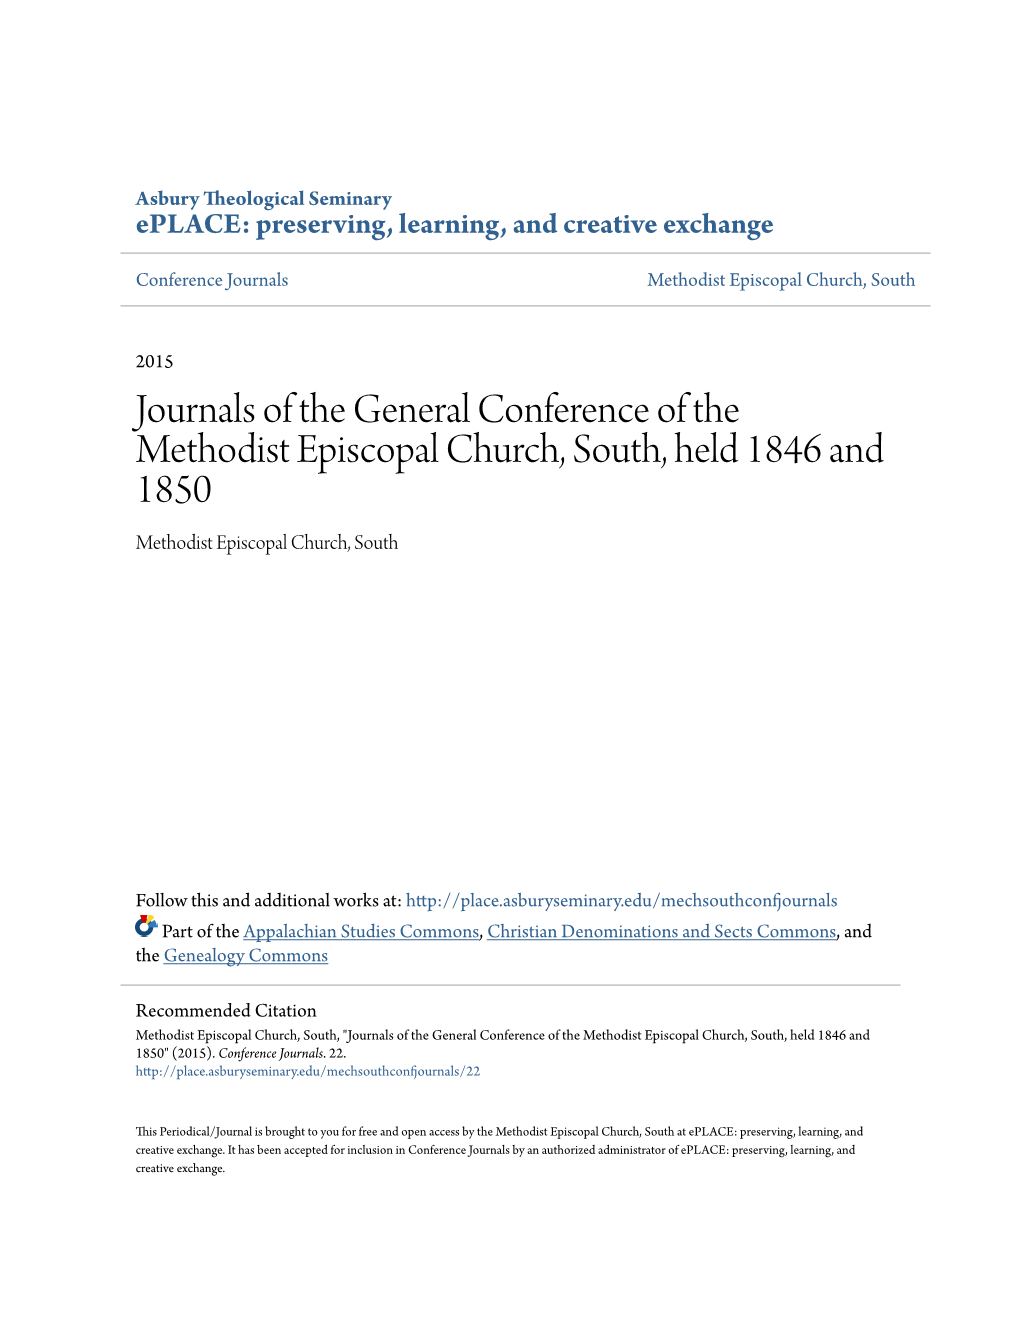 Journals of the General Conference of the Methodist Episcopal Church, South, Held 1846 and 1850 Methodist Episcopal Church, South